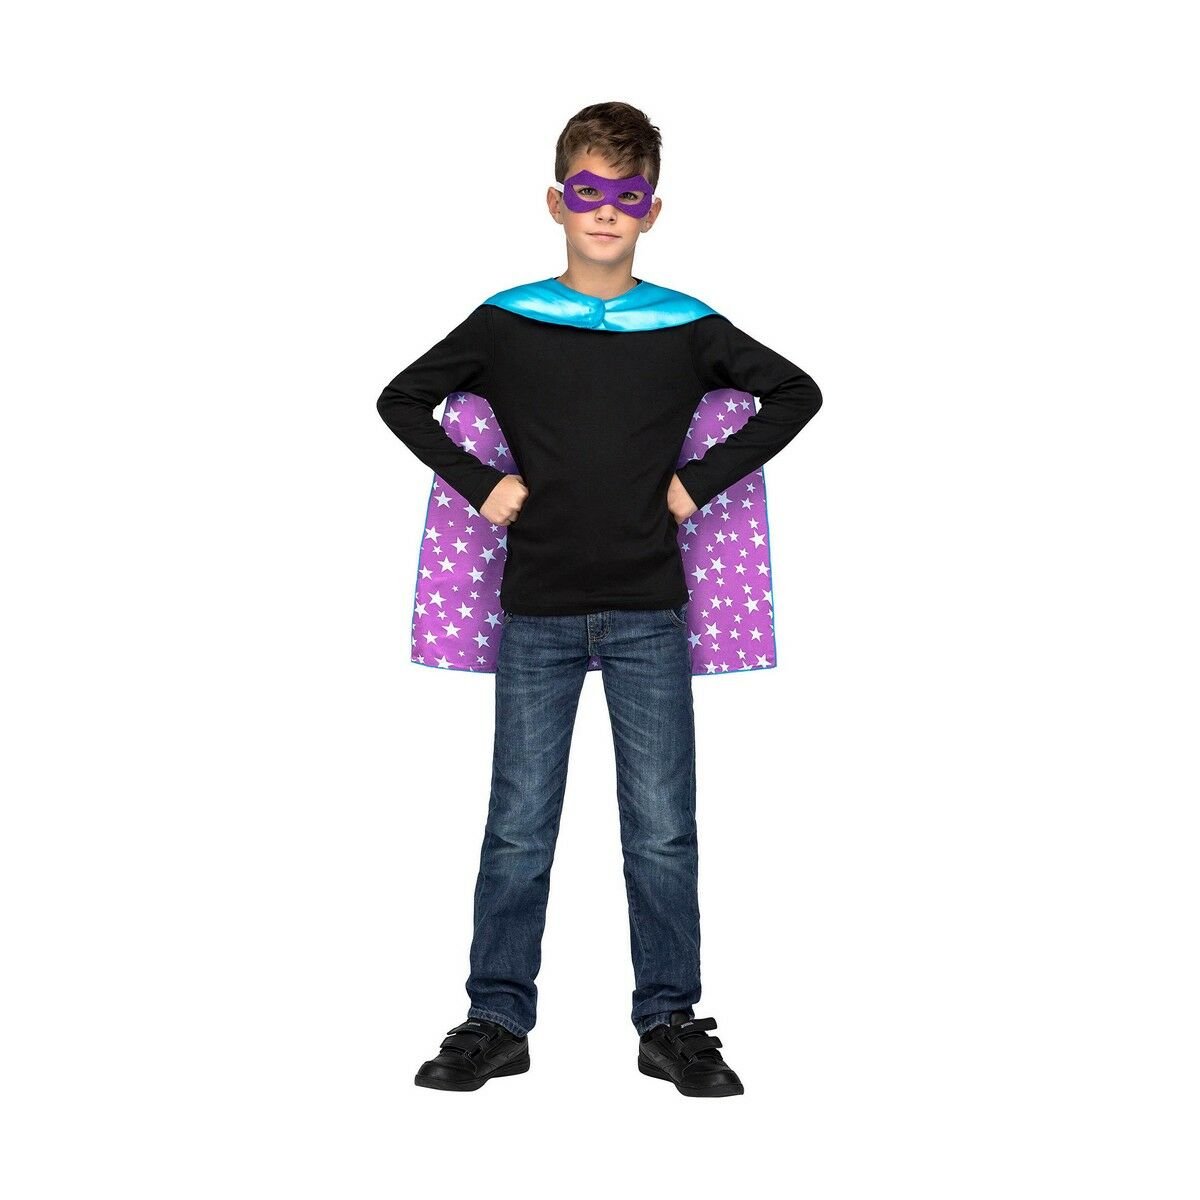 Costume for Children My Other Me Blue Superhero 3-6 years (2 Pieces)